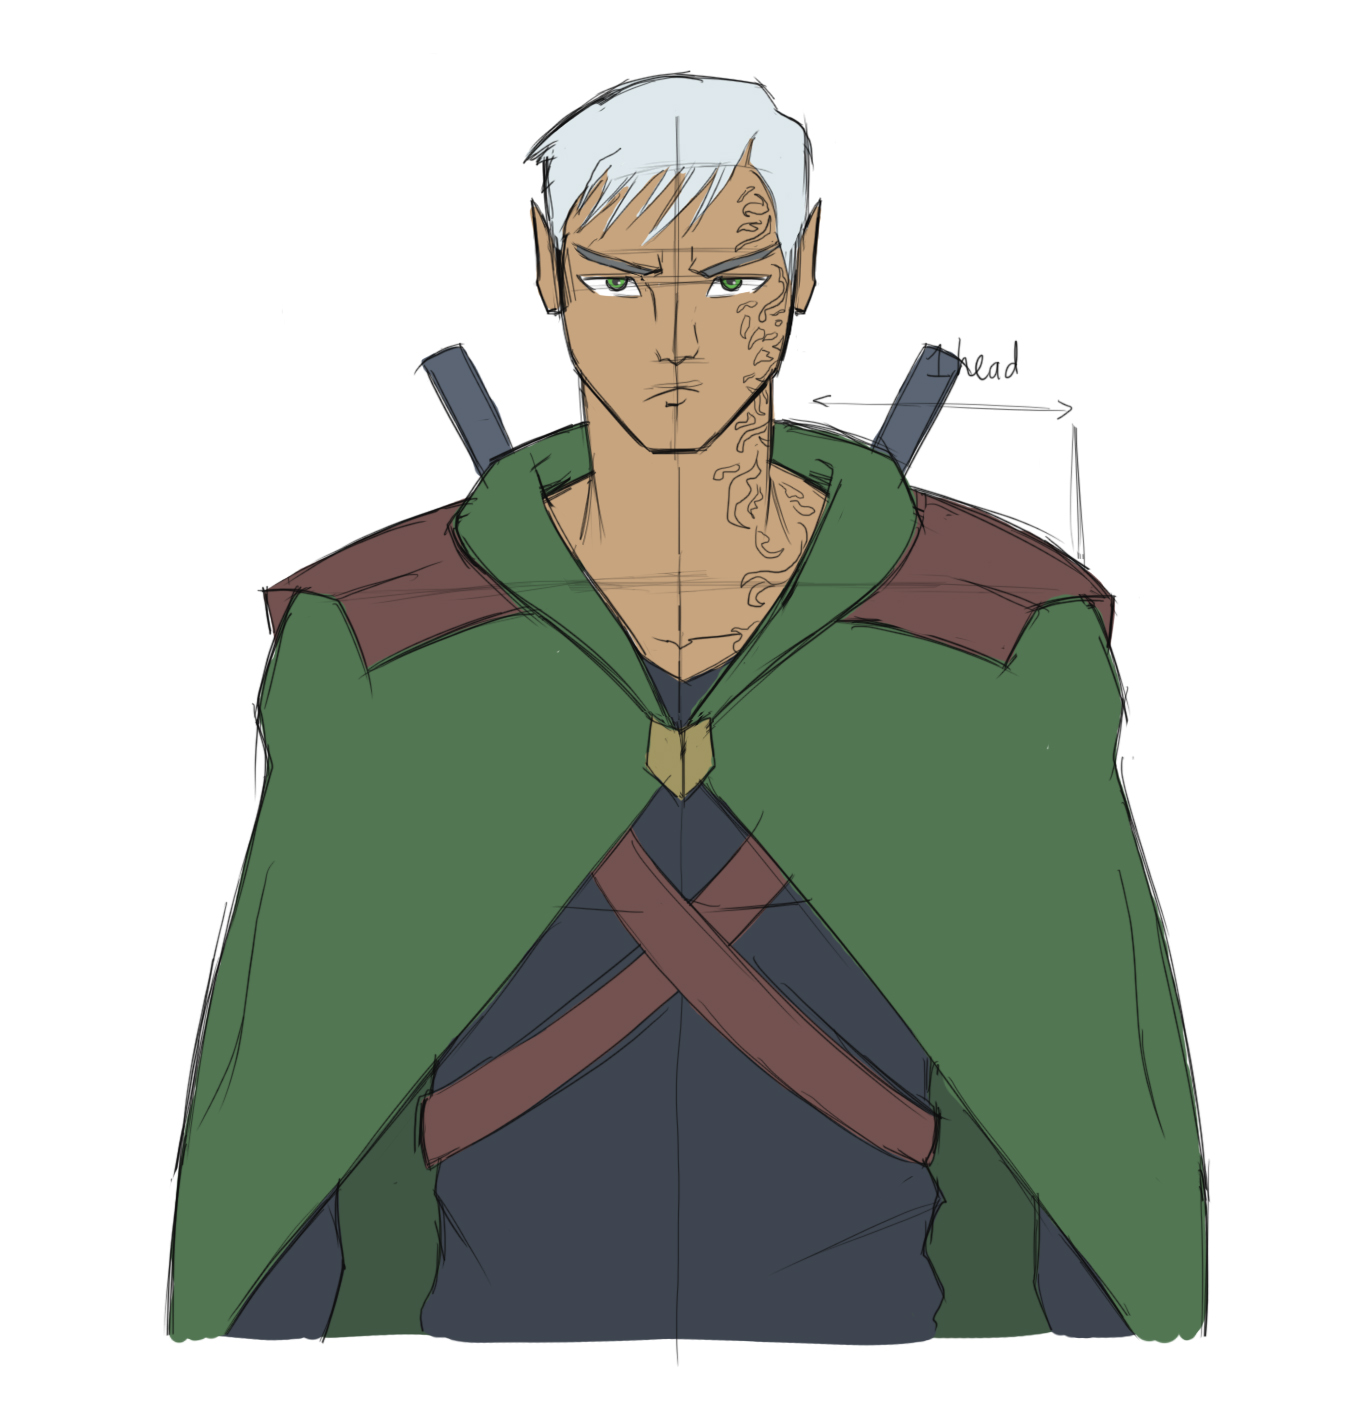 Tan and built male with snow-white hair. He looks at us with a determined expression. He wears a forest-green cloak with eyes to match. Underneath is a black shirt. On his back he carries two twin blades, the handles are peeking over his shoulders.